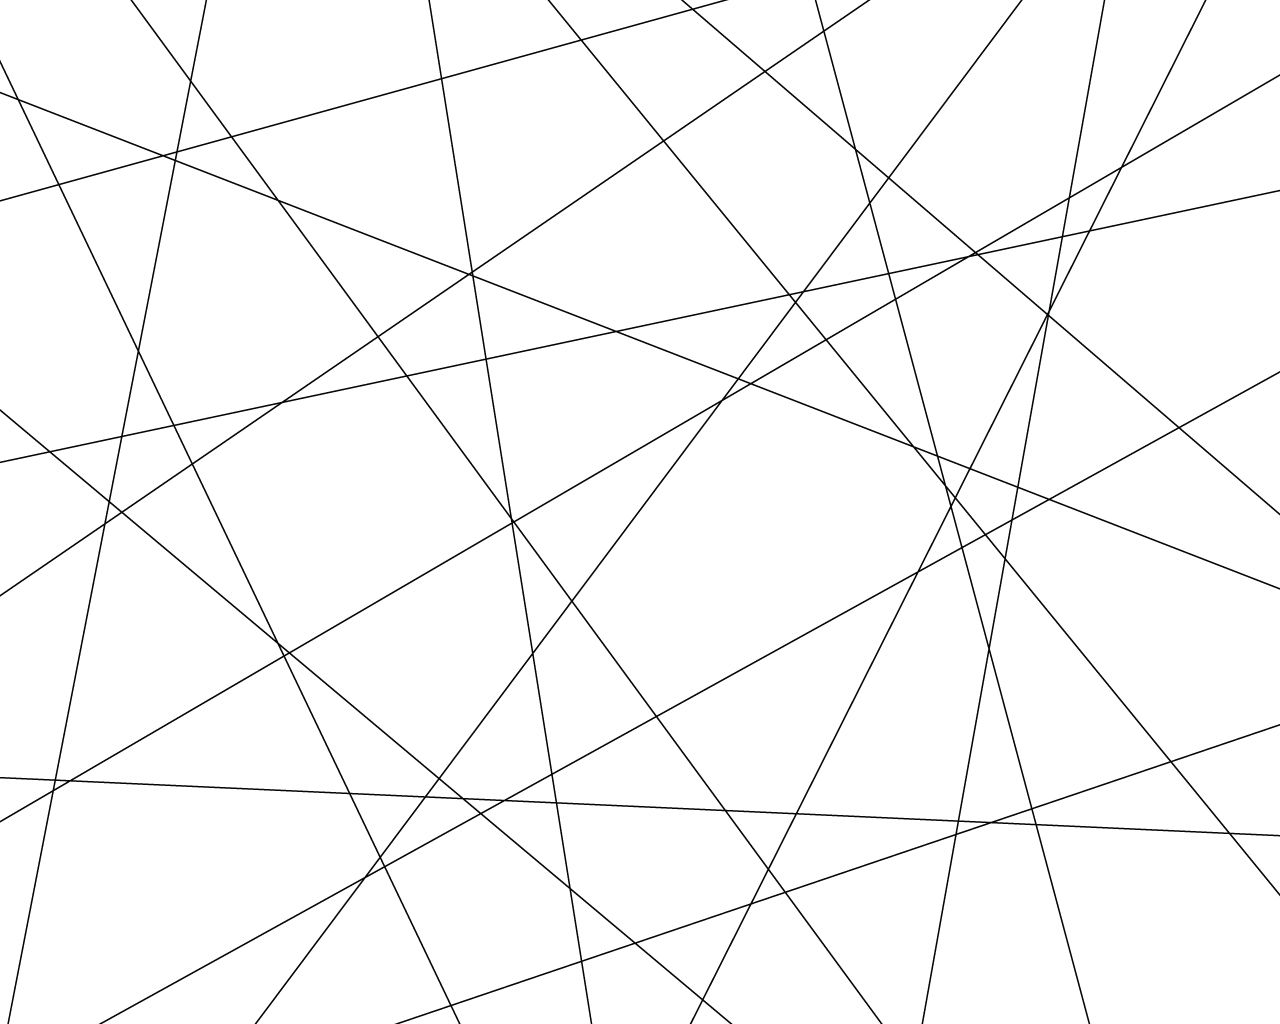 A web of black lines on a white background - 1280x1024